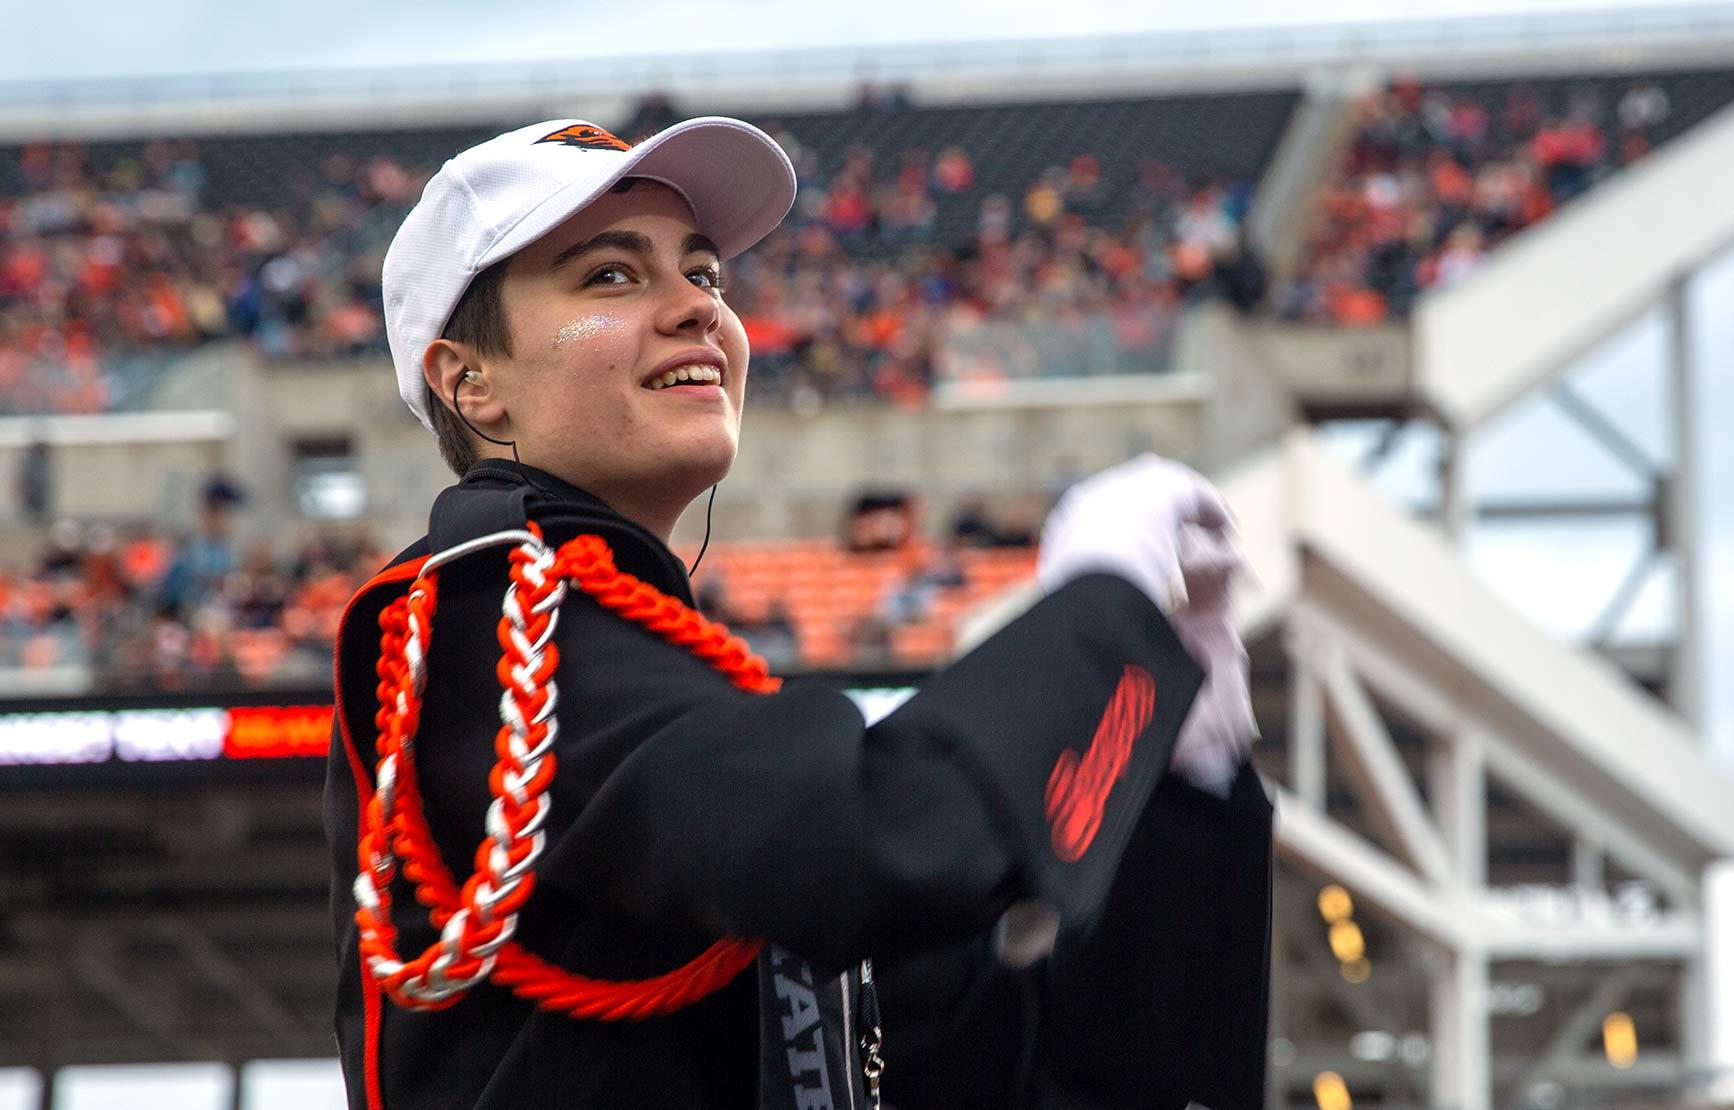 A young man conducts the Oregon State University marching band at a football